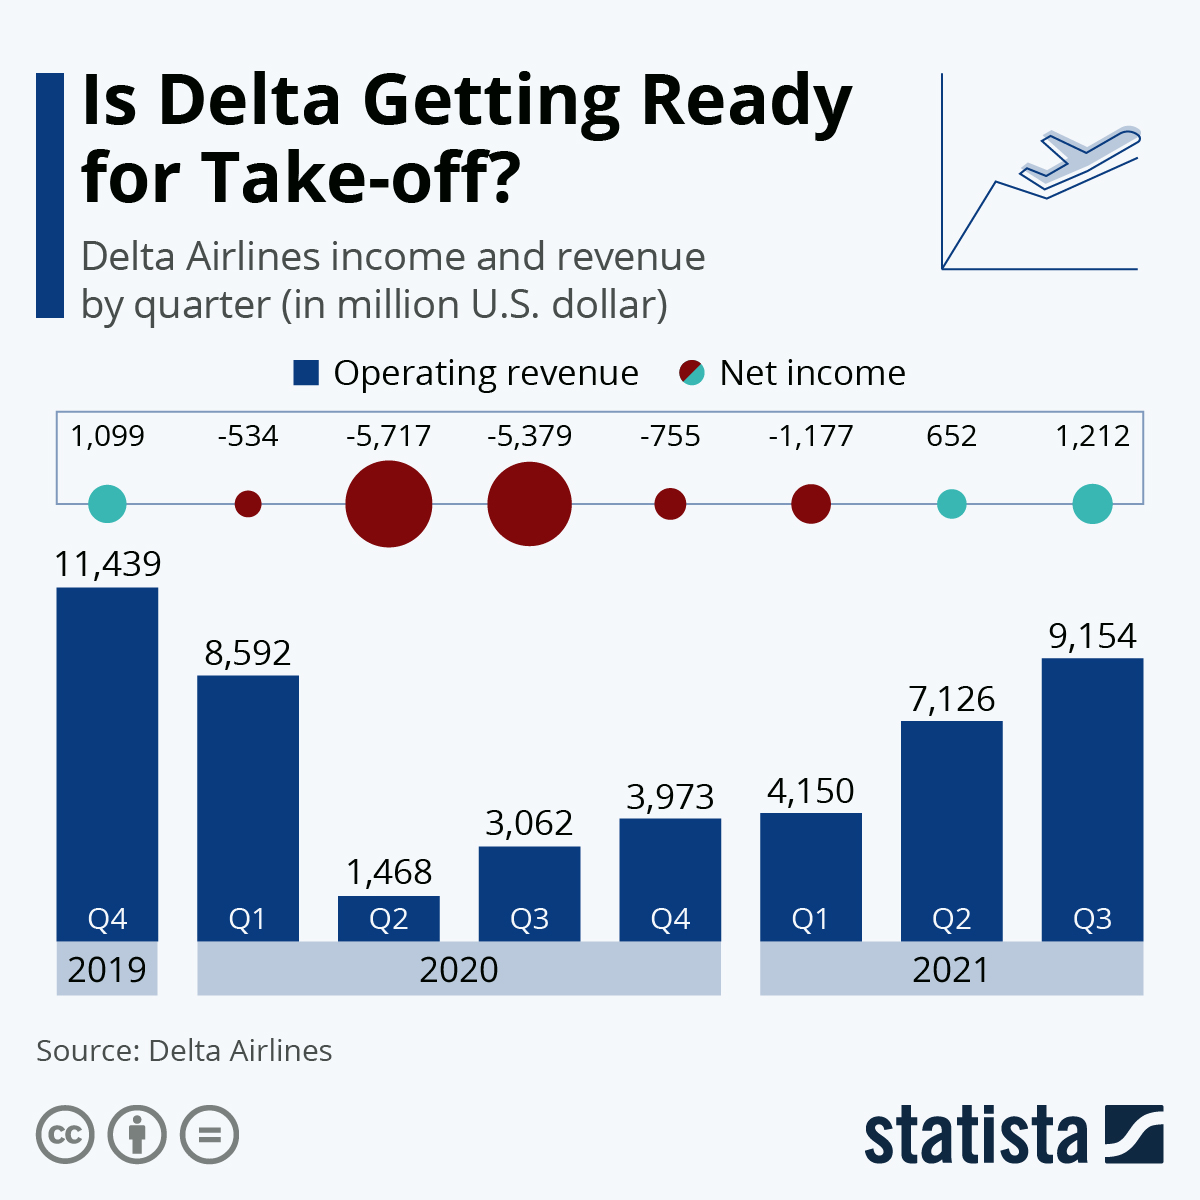 Is Delta Getting Ready for Take-off?